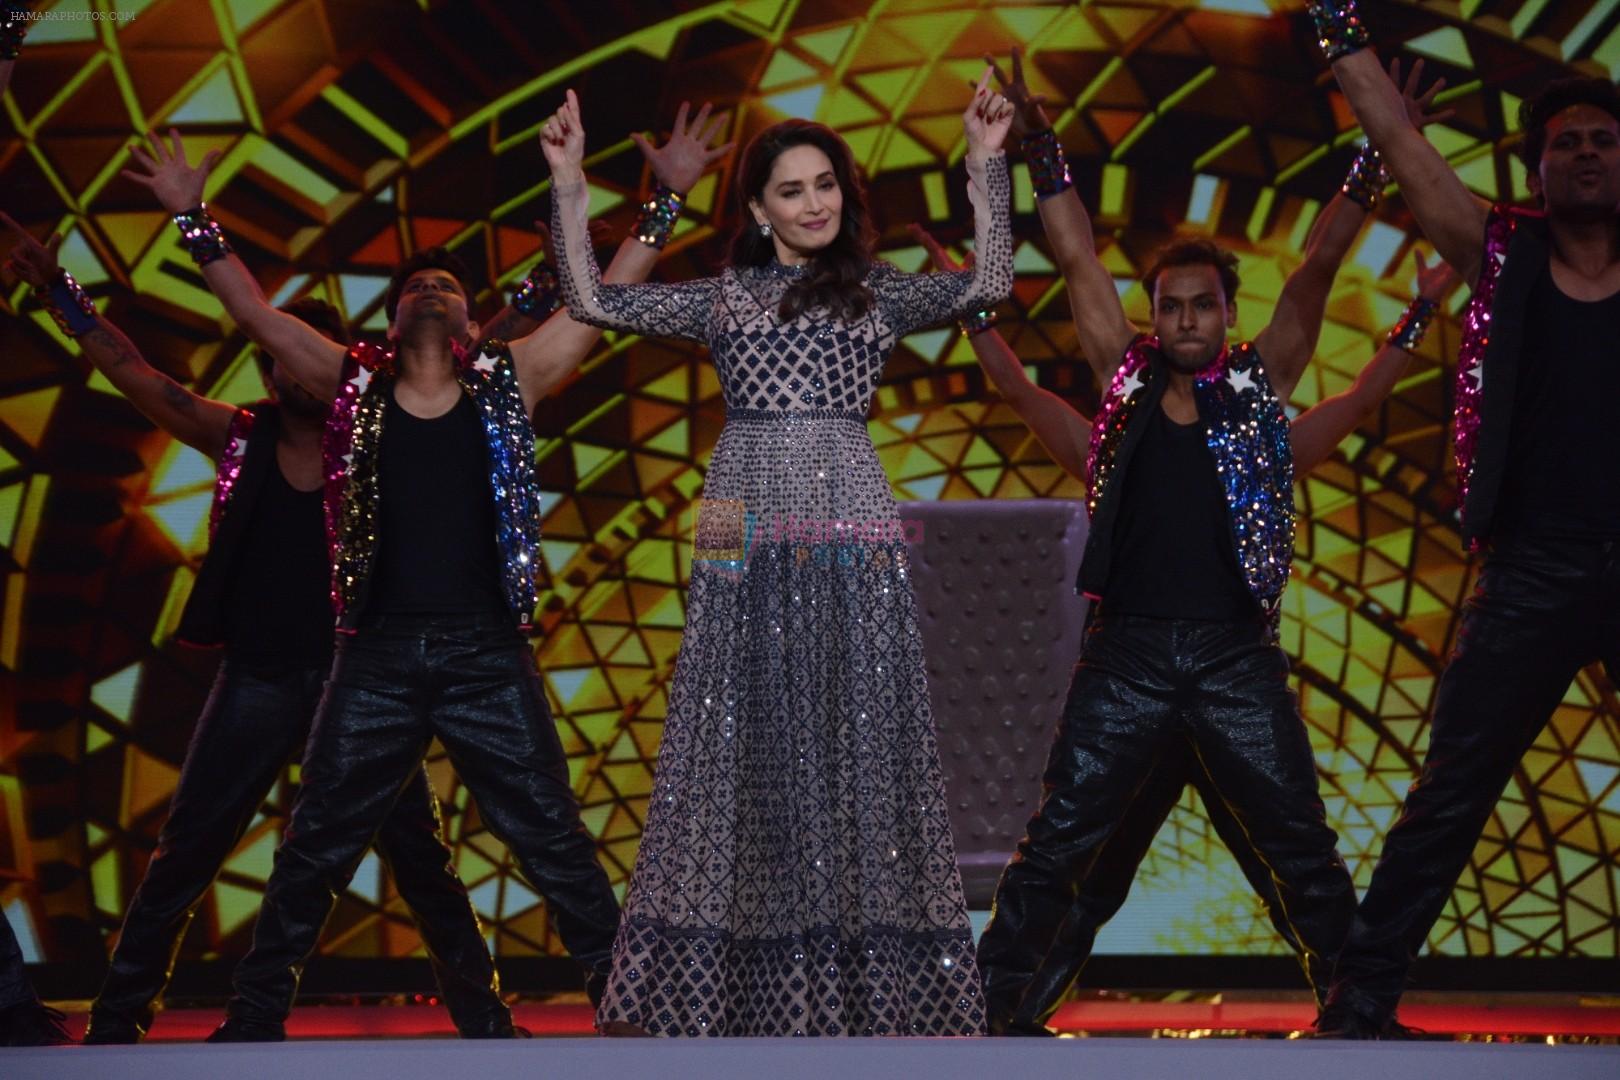 Madhuri Dixit at Umang police festival in bkc on 27th Jan 2019